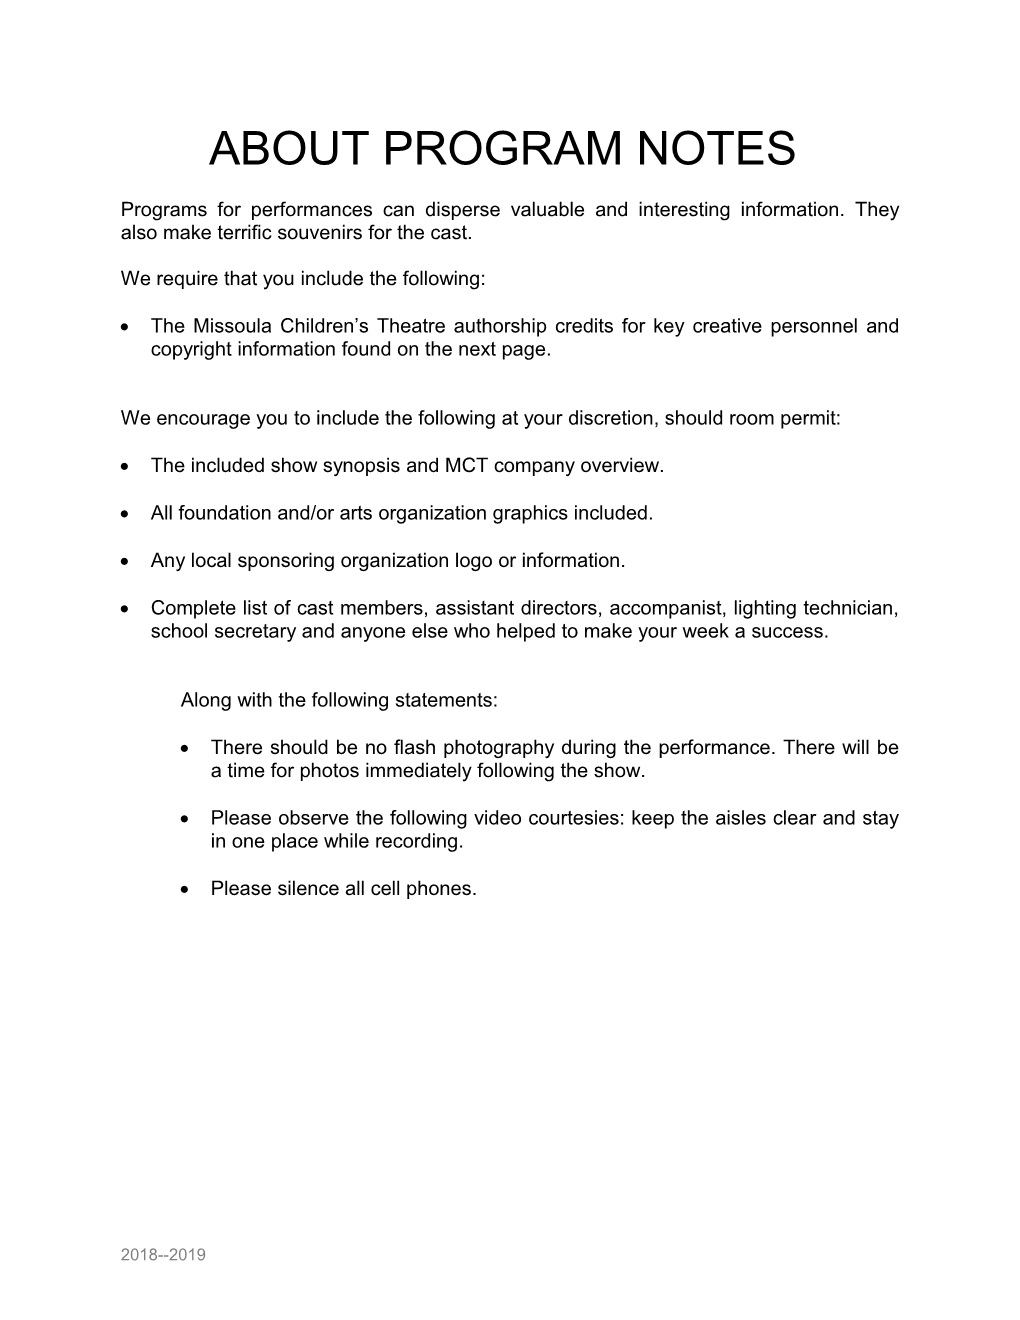 About Program Notes